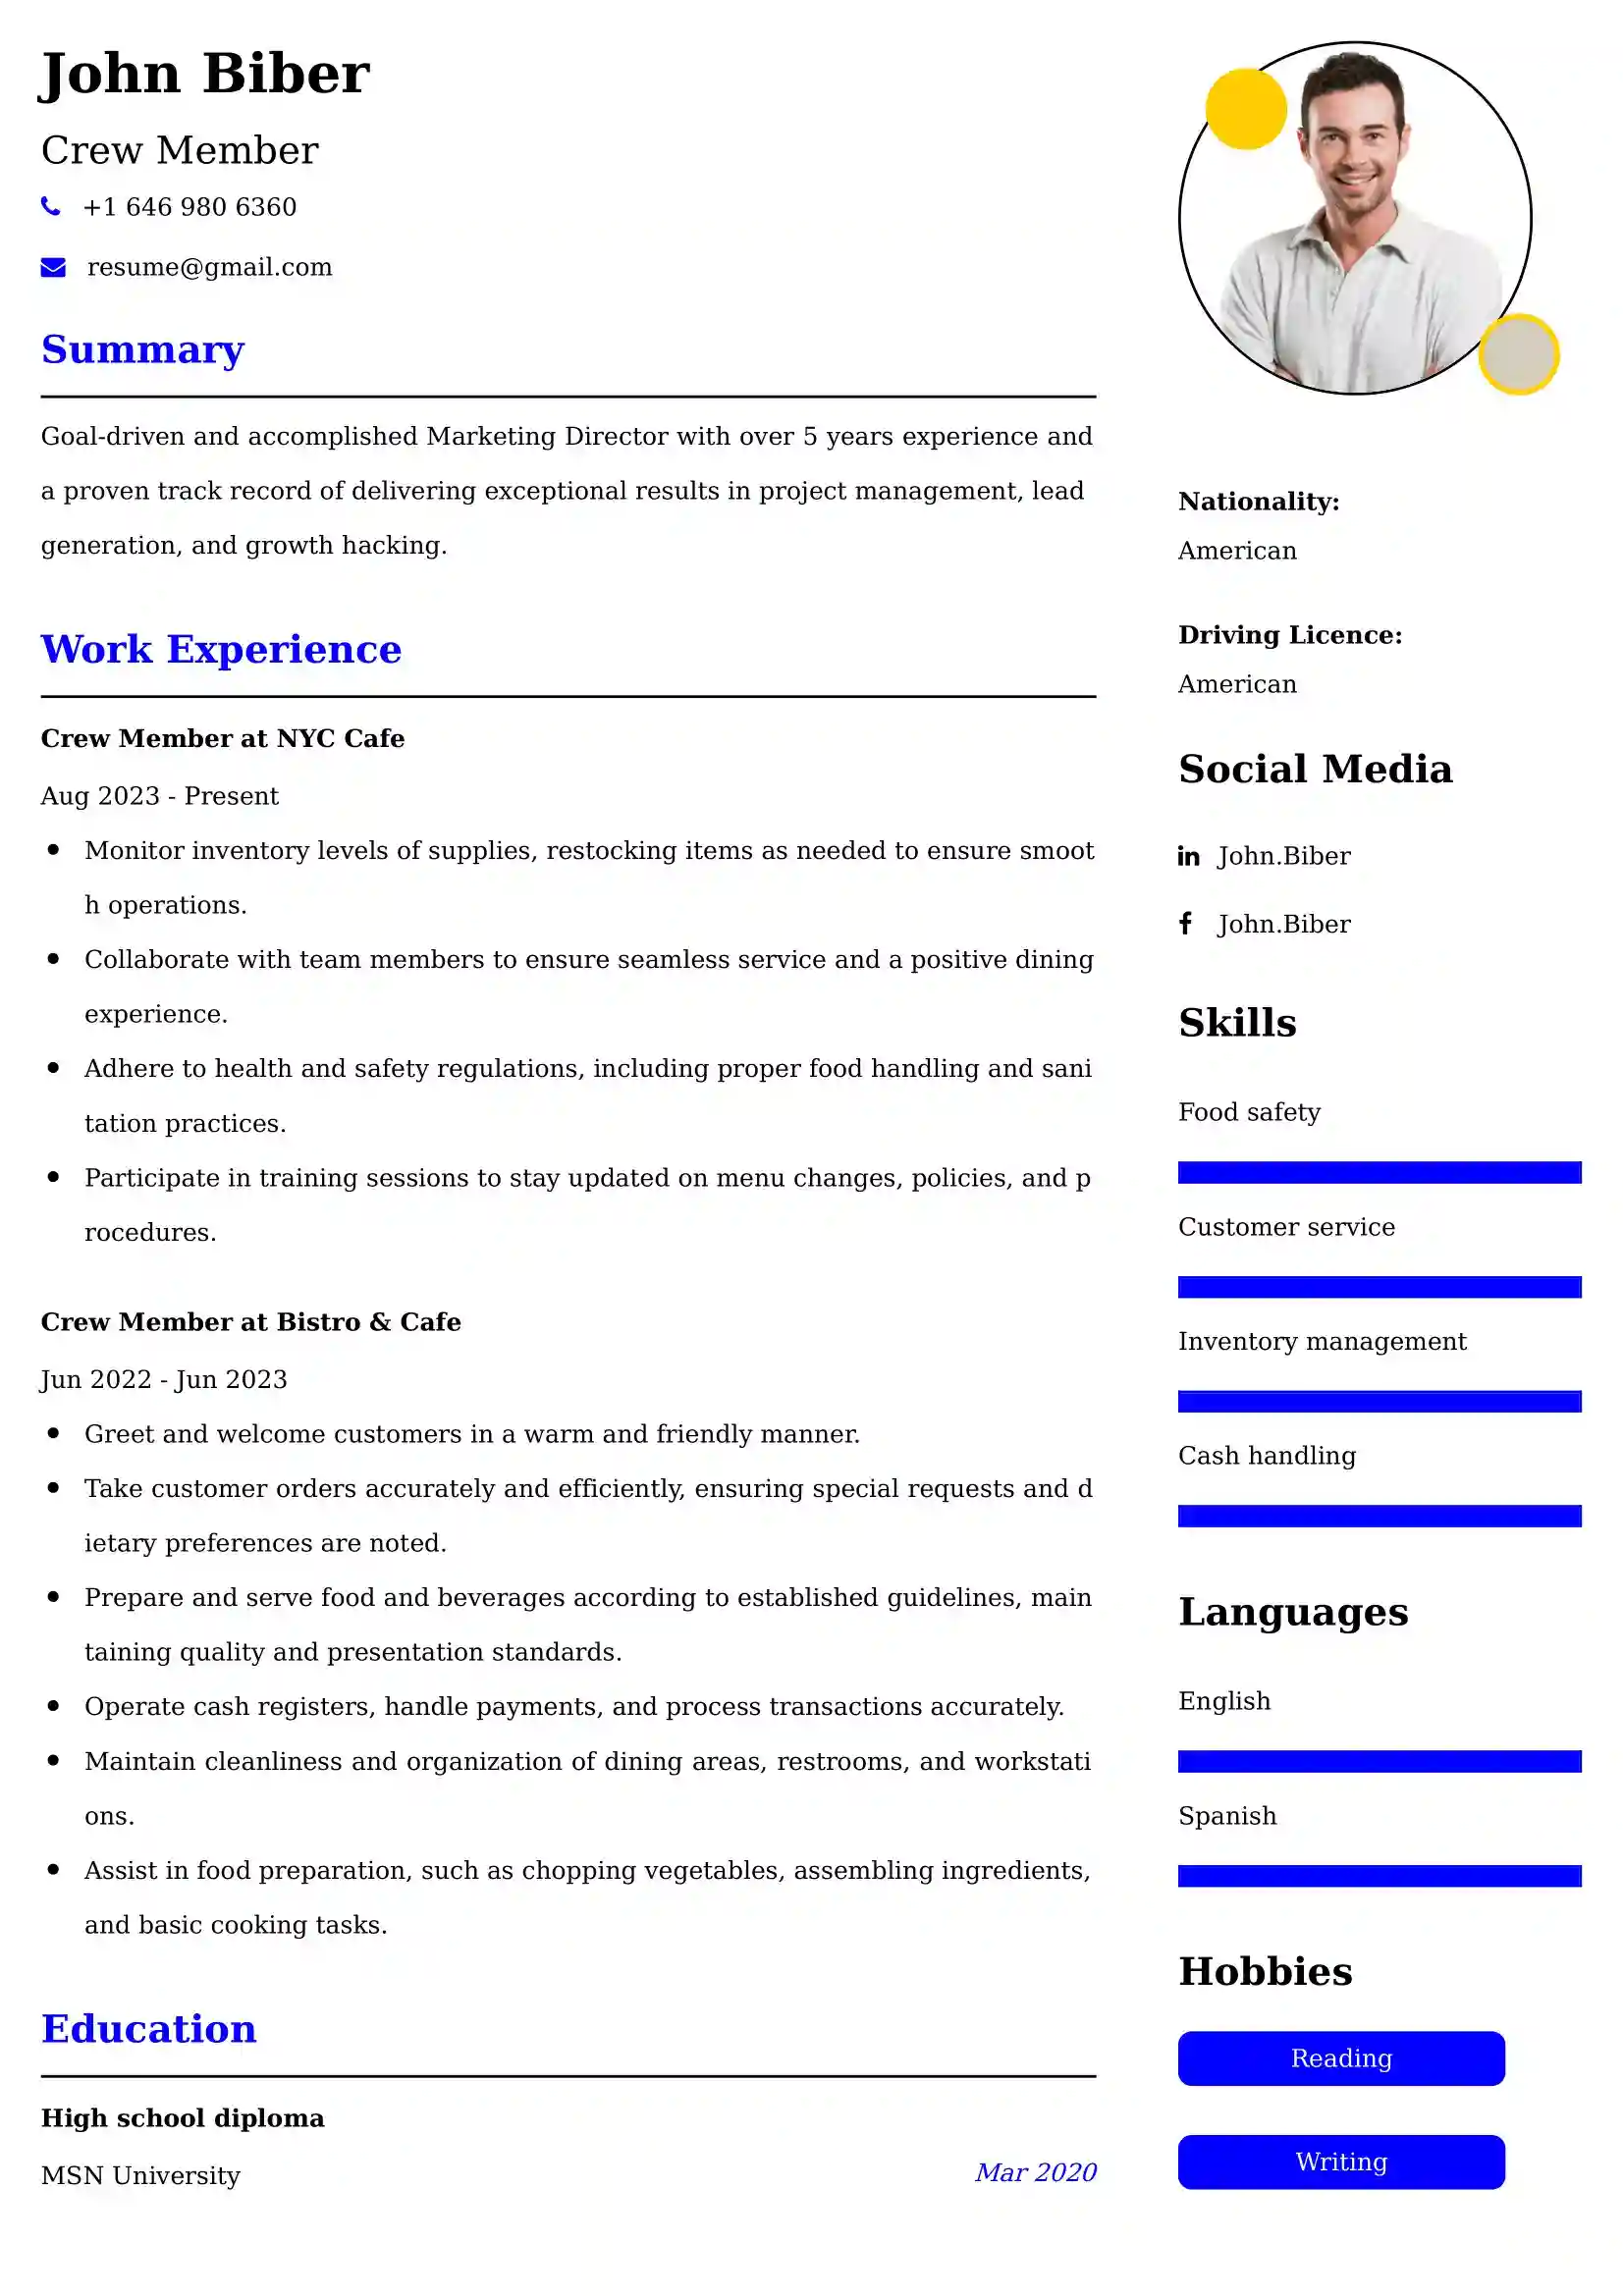 42+ Professional Food Service Resume Examples, Latest CV Format